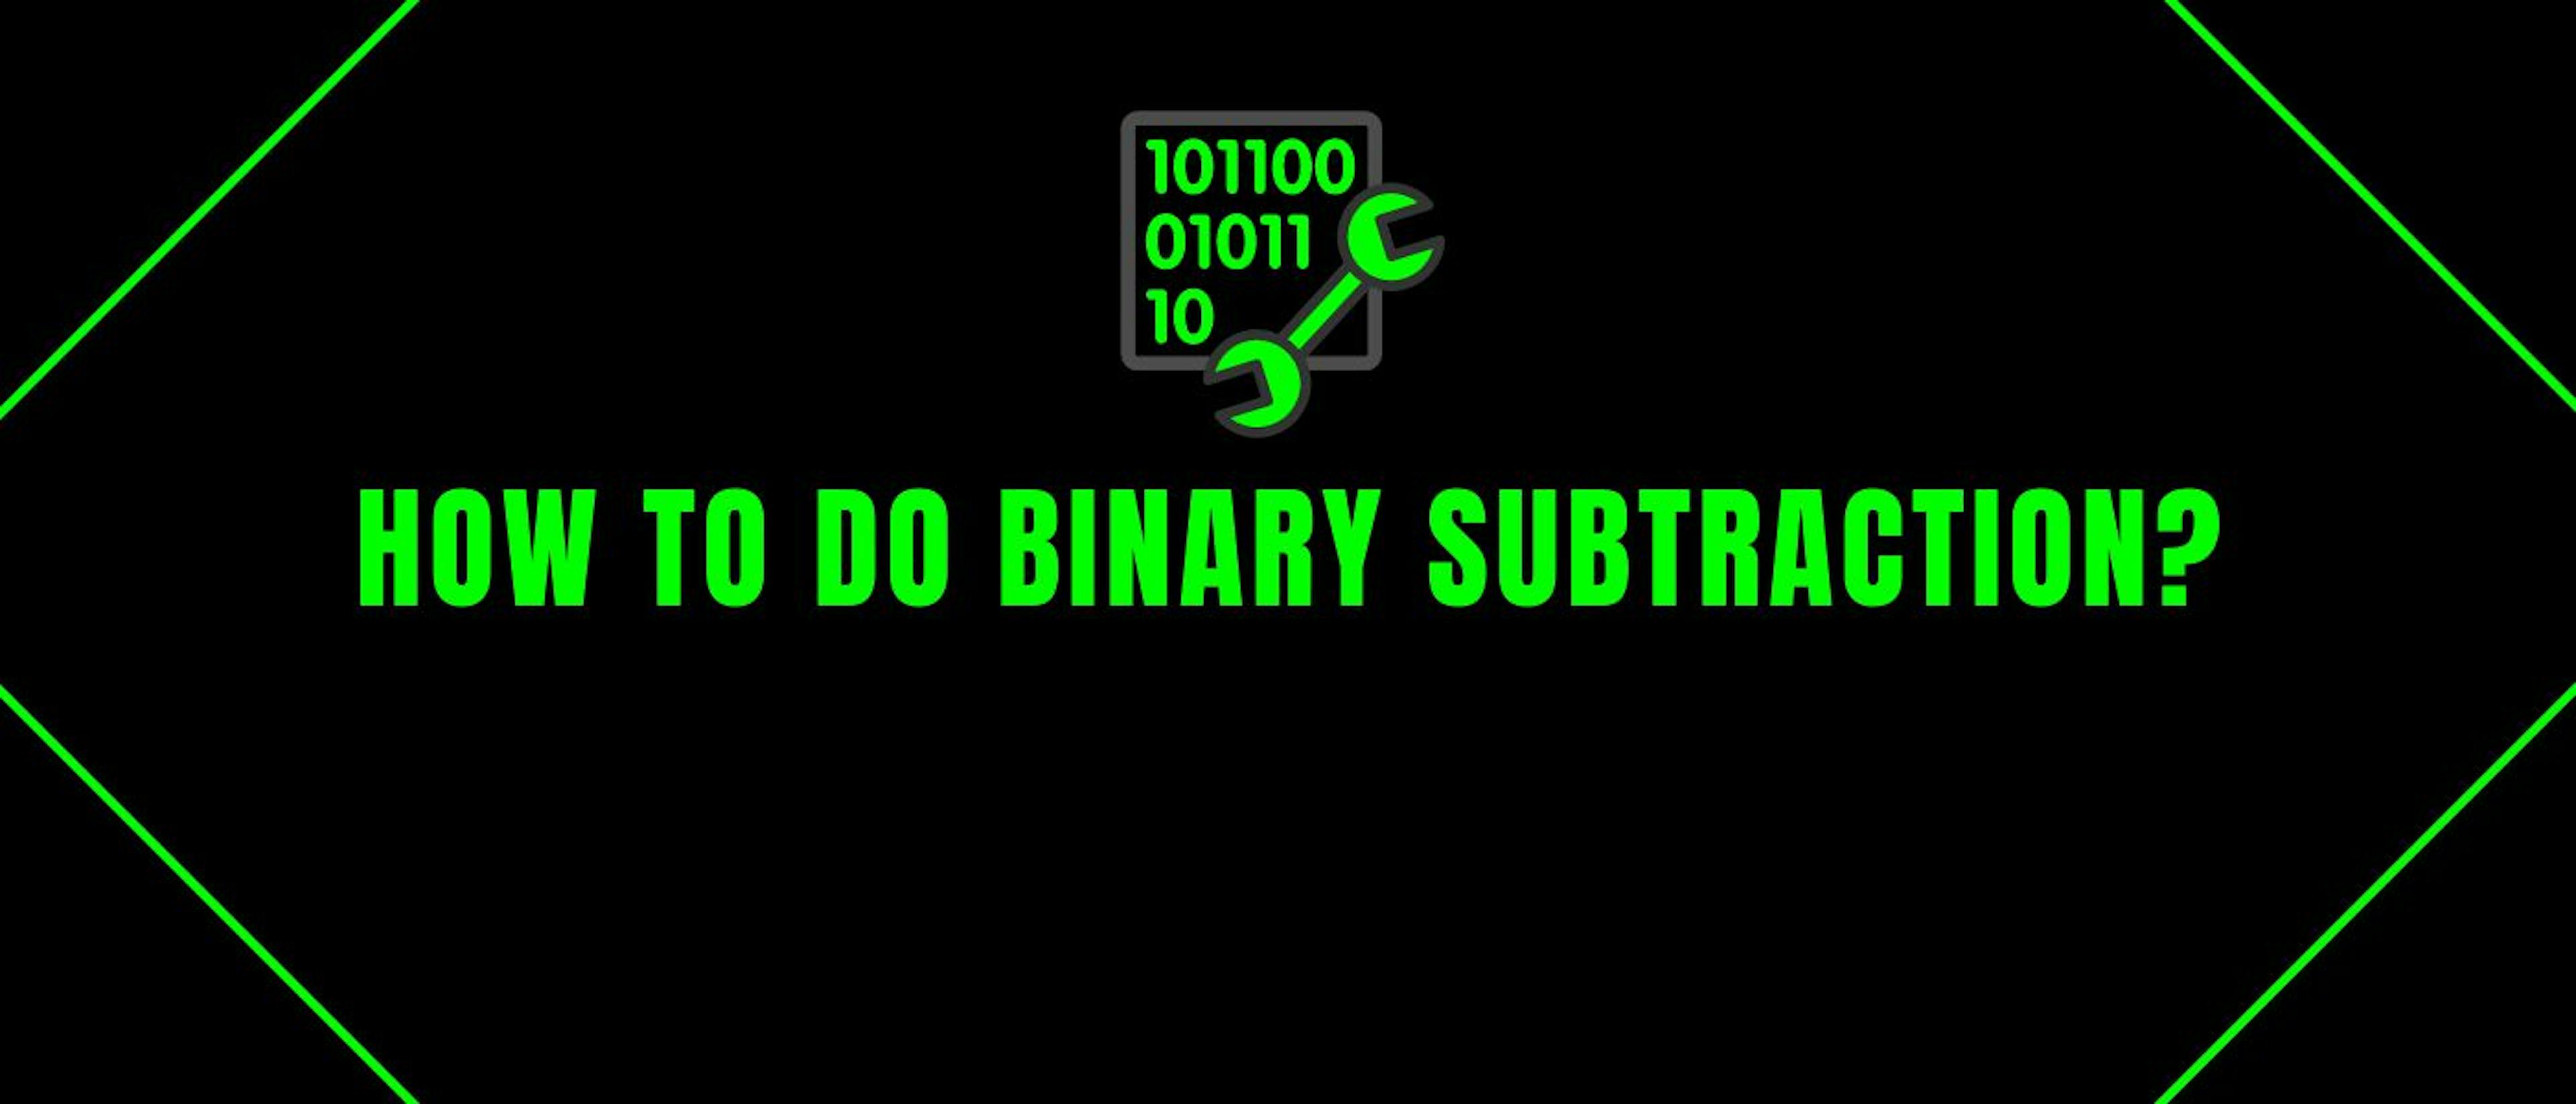 featured image - Creating a C++ Program To Do Binary Subtraction